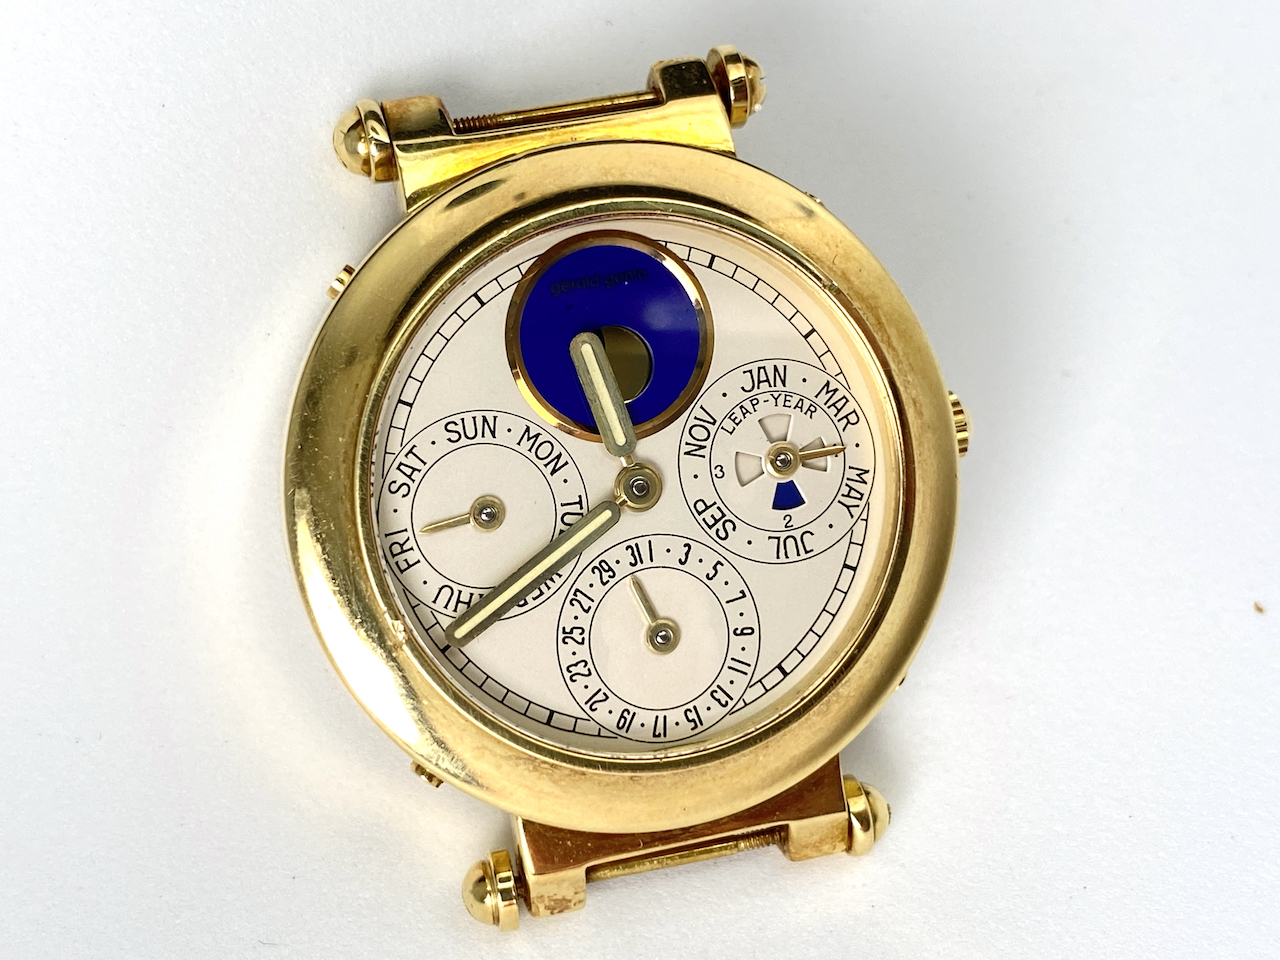 18CT GERALD GENTA PERPETUAL CALENDAR WATCH,HEAD ONLY, round, creme dial with illuminated gold